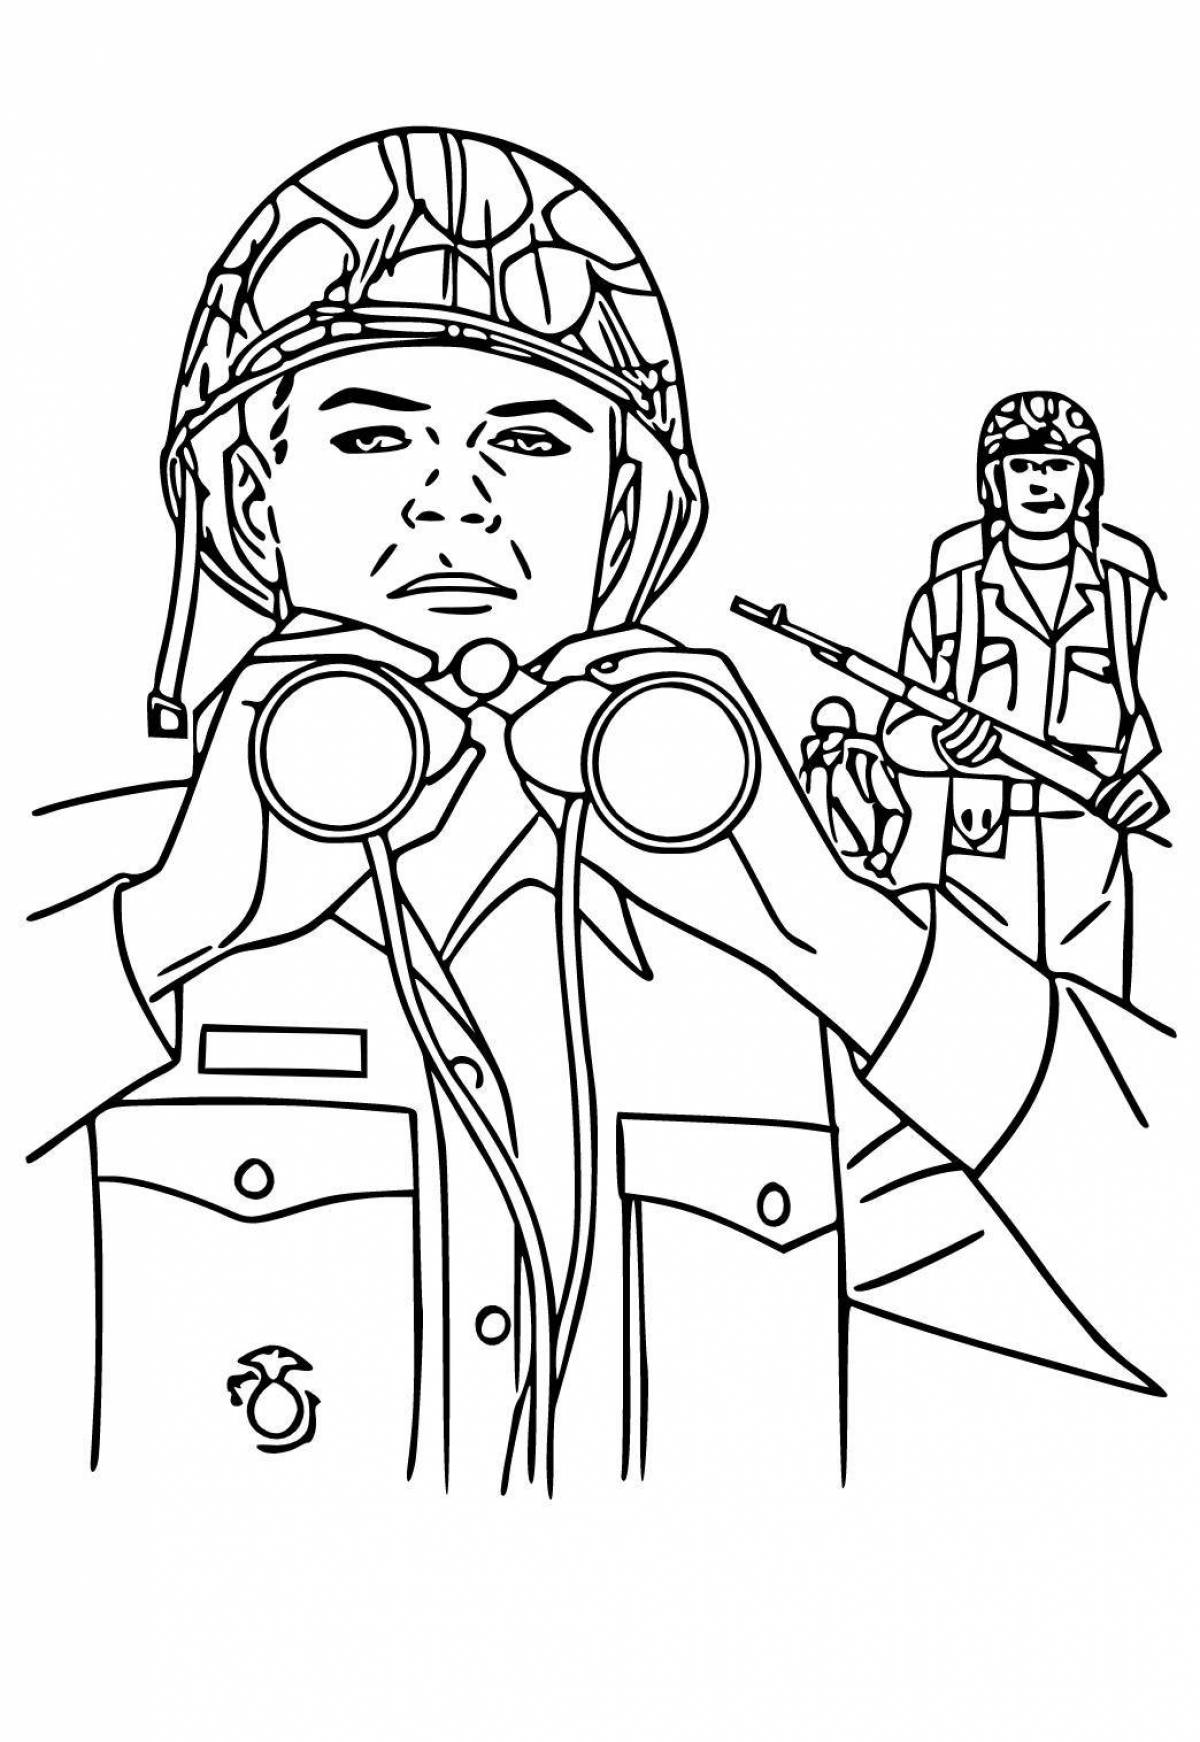 Great soldier face coloring book